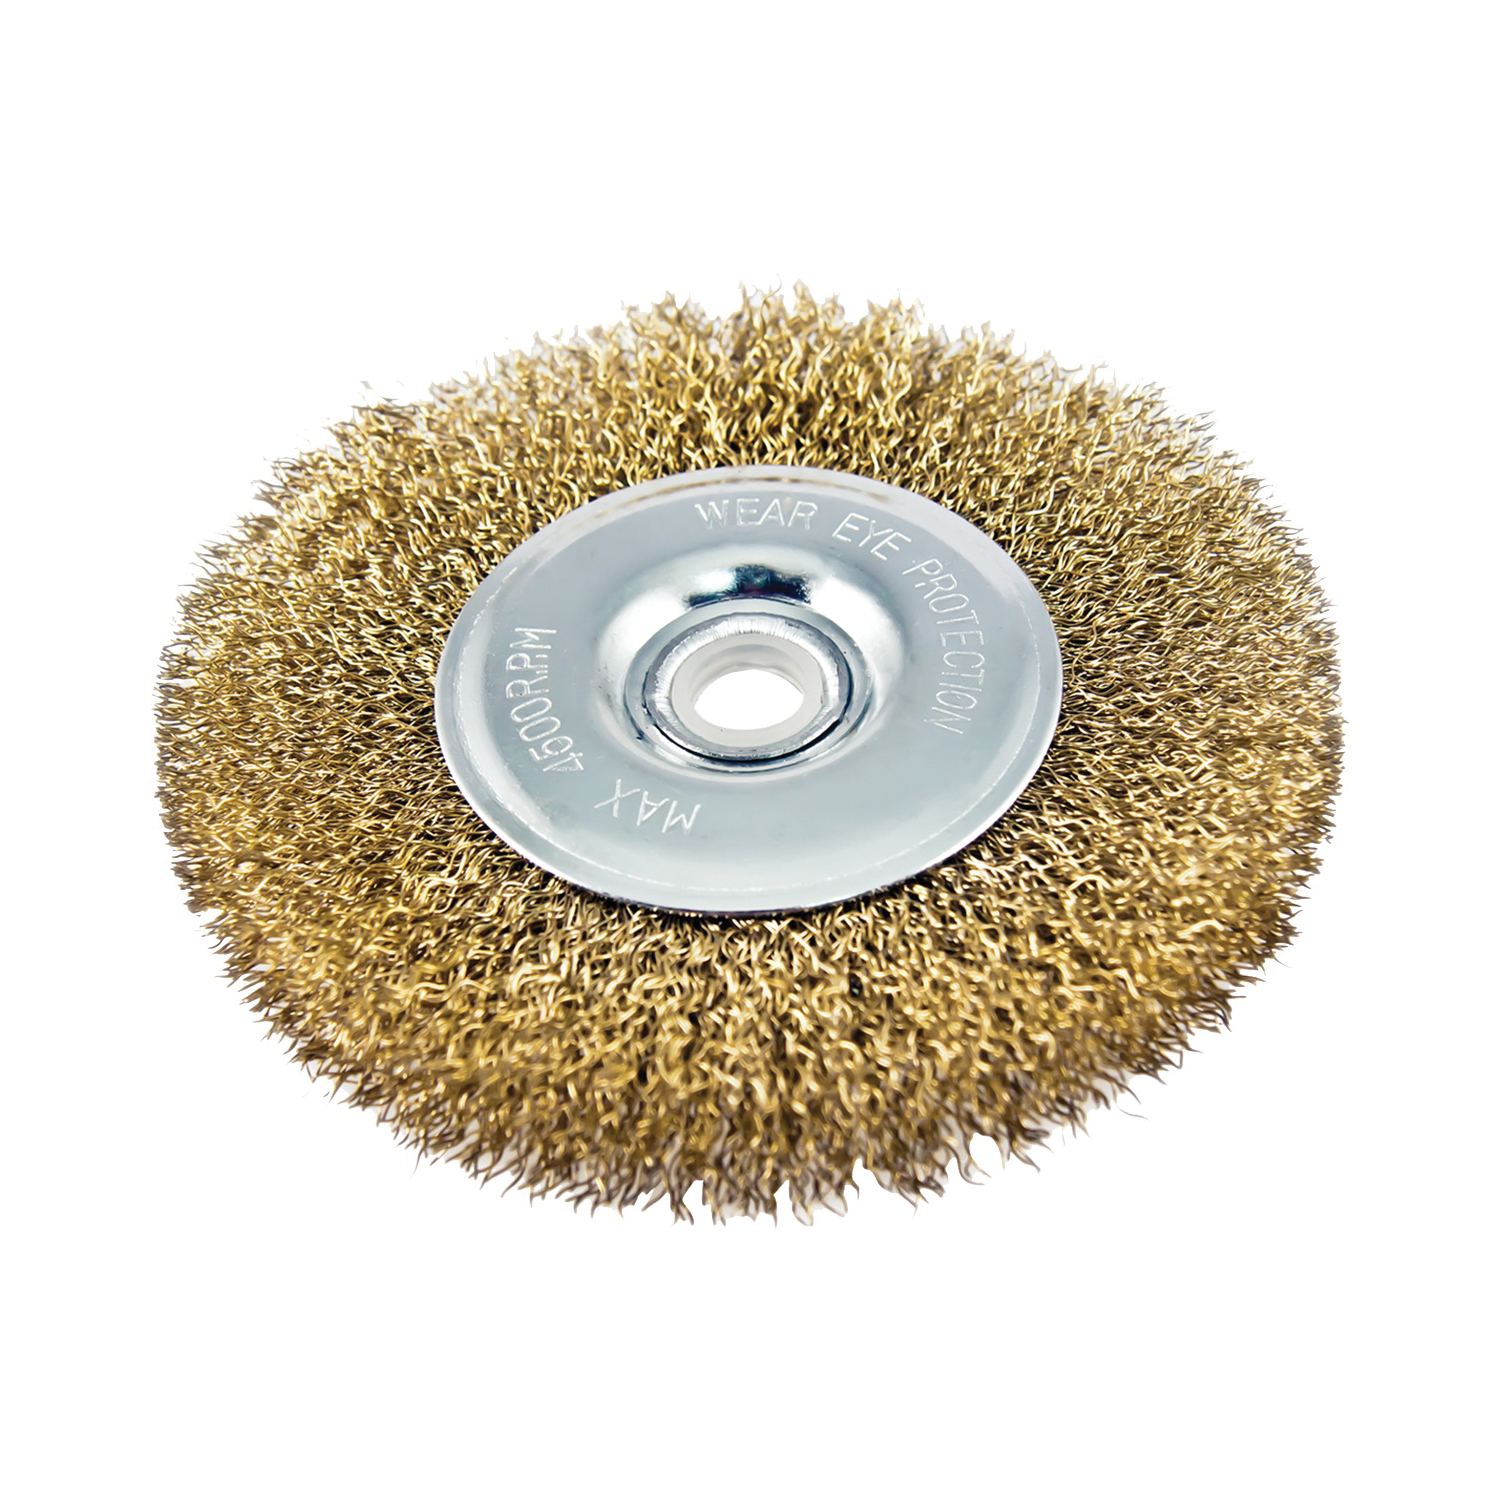 323281OR Wire Wheel Brush with Hole, 6 in Dia, 5/8 in Arbor Hole, 1/2 in Adapter Ring Arbor/Shank